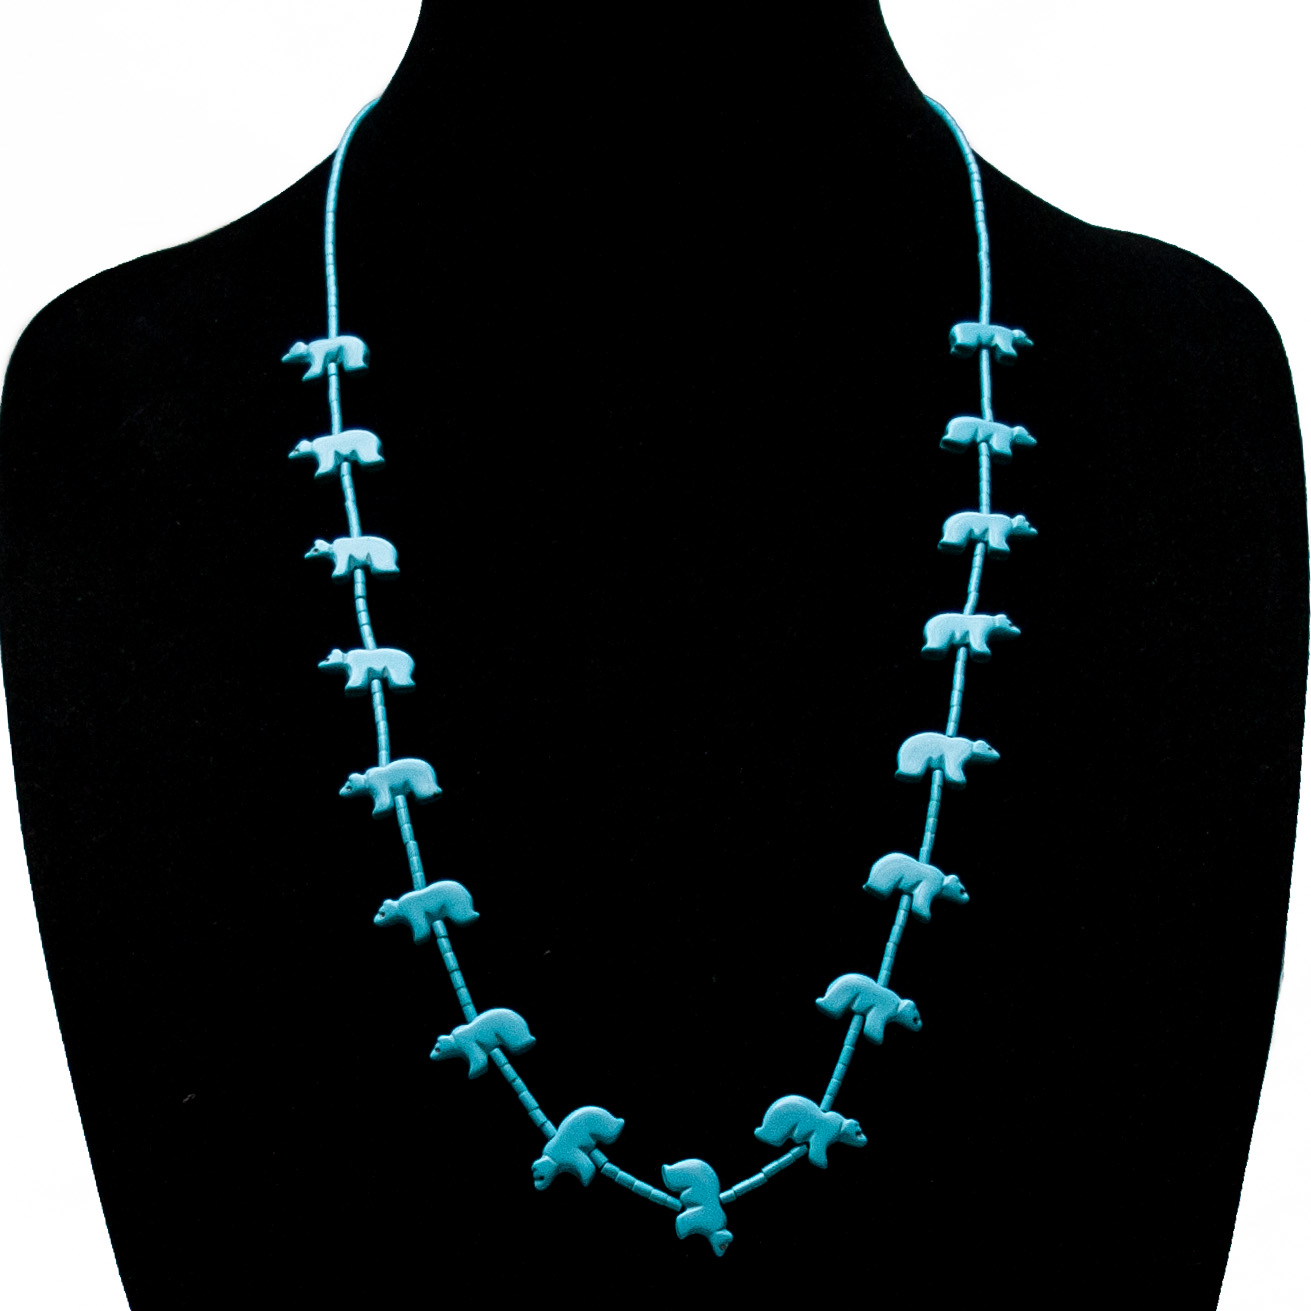 Chaco CHACO CANYON RUNNING BEAR NATIVE AMERICAN FETISH NECKLACE TURQUOISE EARRINGS SET 